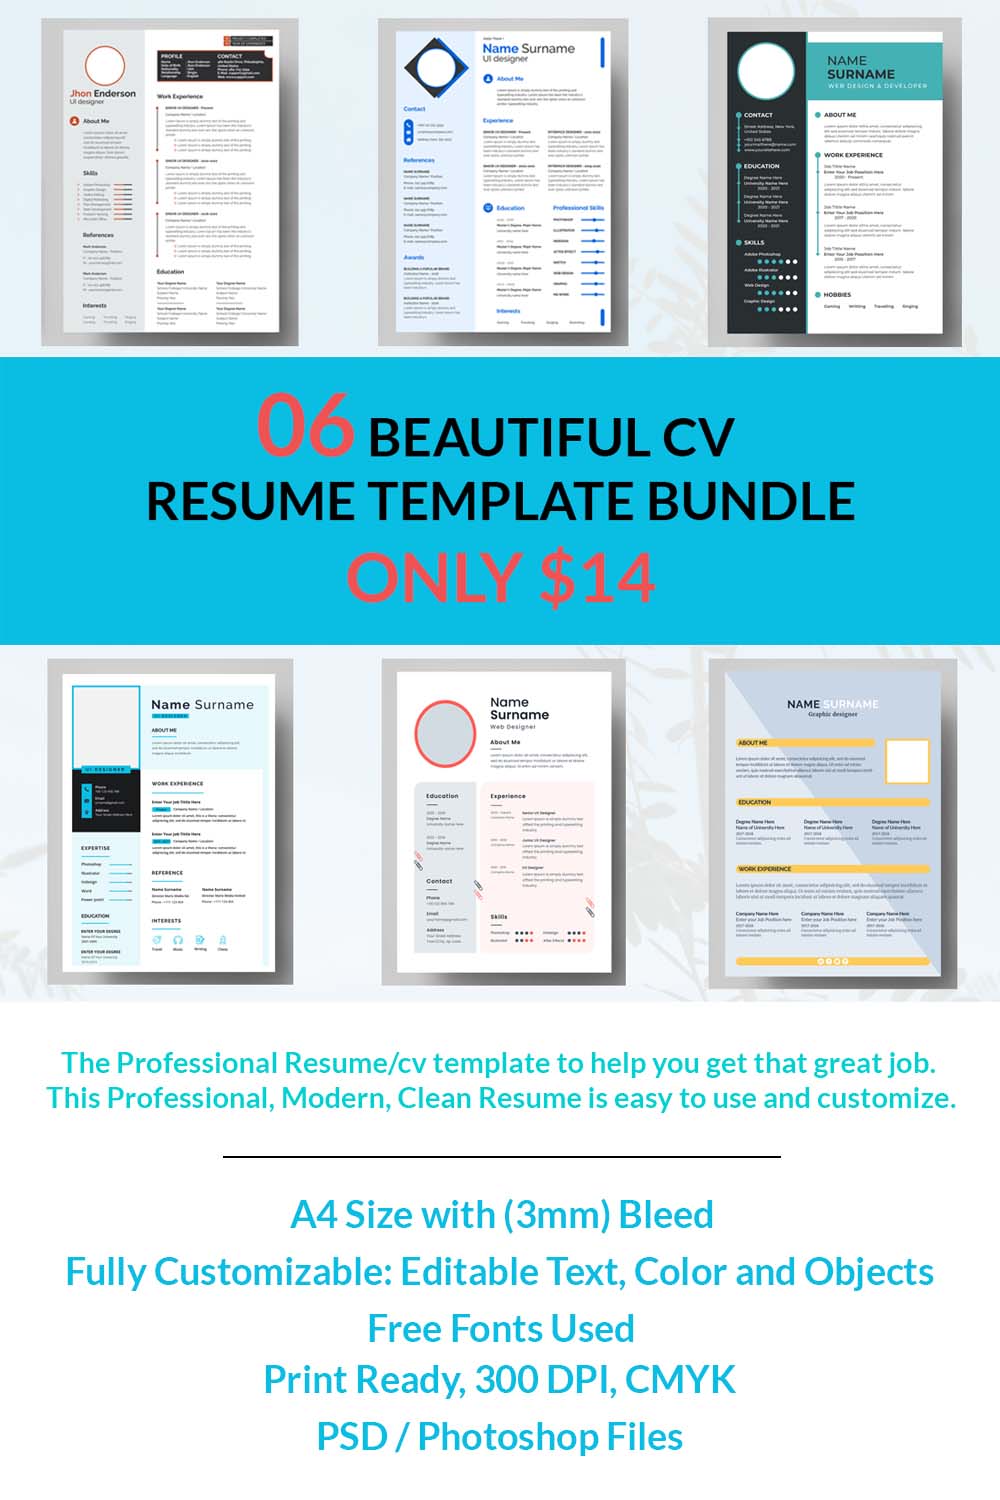 06 BEAUTIFUL CV RESUME TEMPLATE BUNDLE ONLY $14 pinterest preview image.